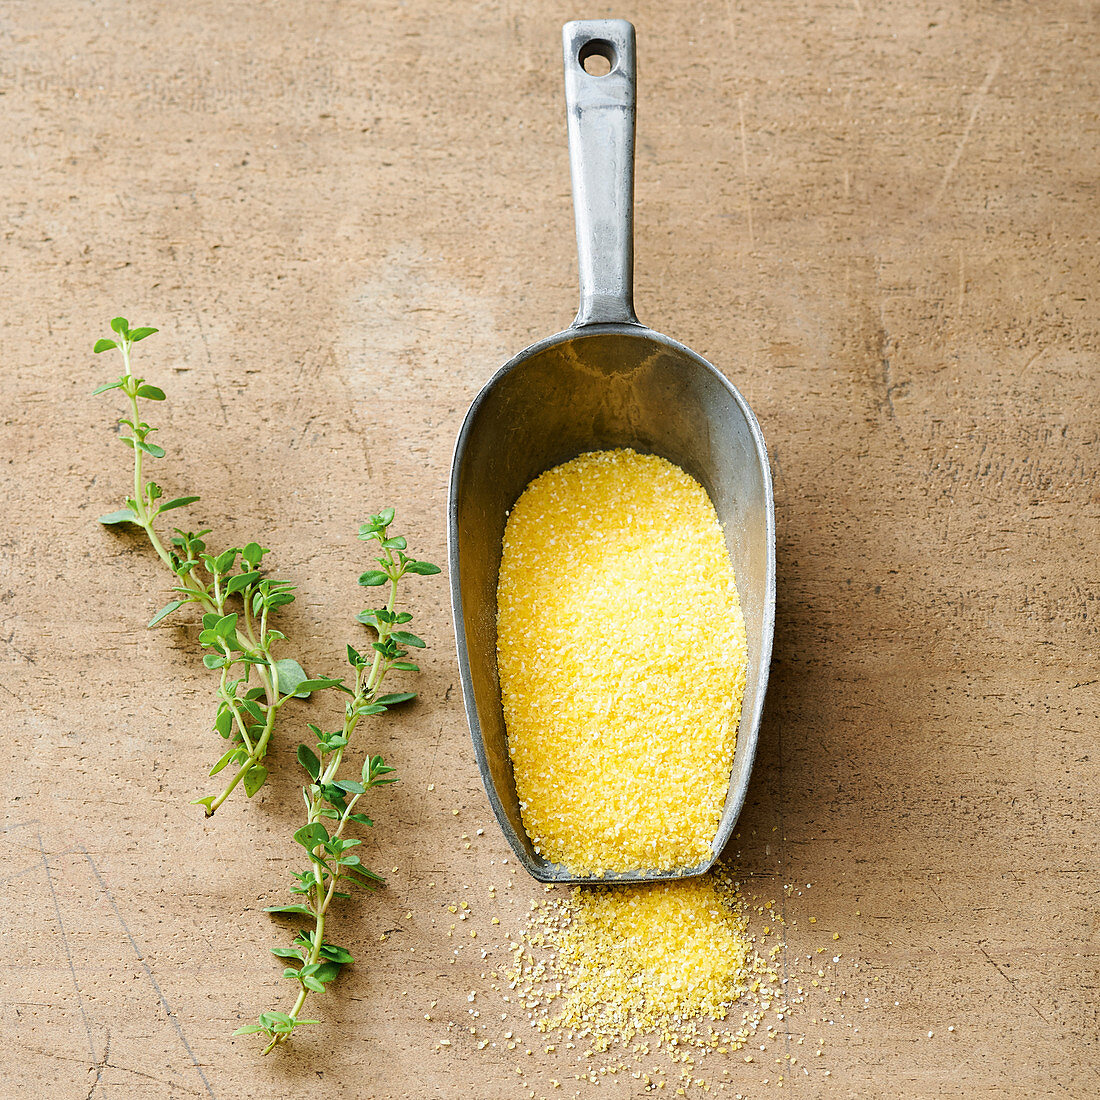 A scoop of polenta and fresh thyme sprigs